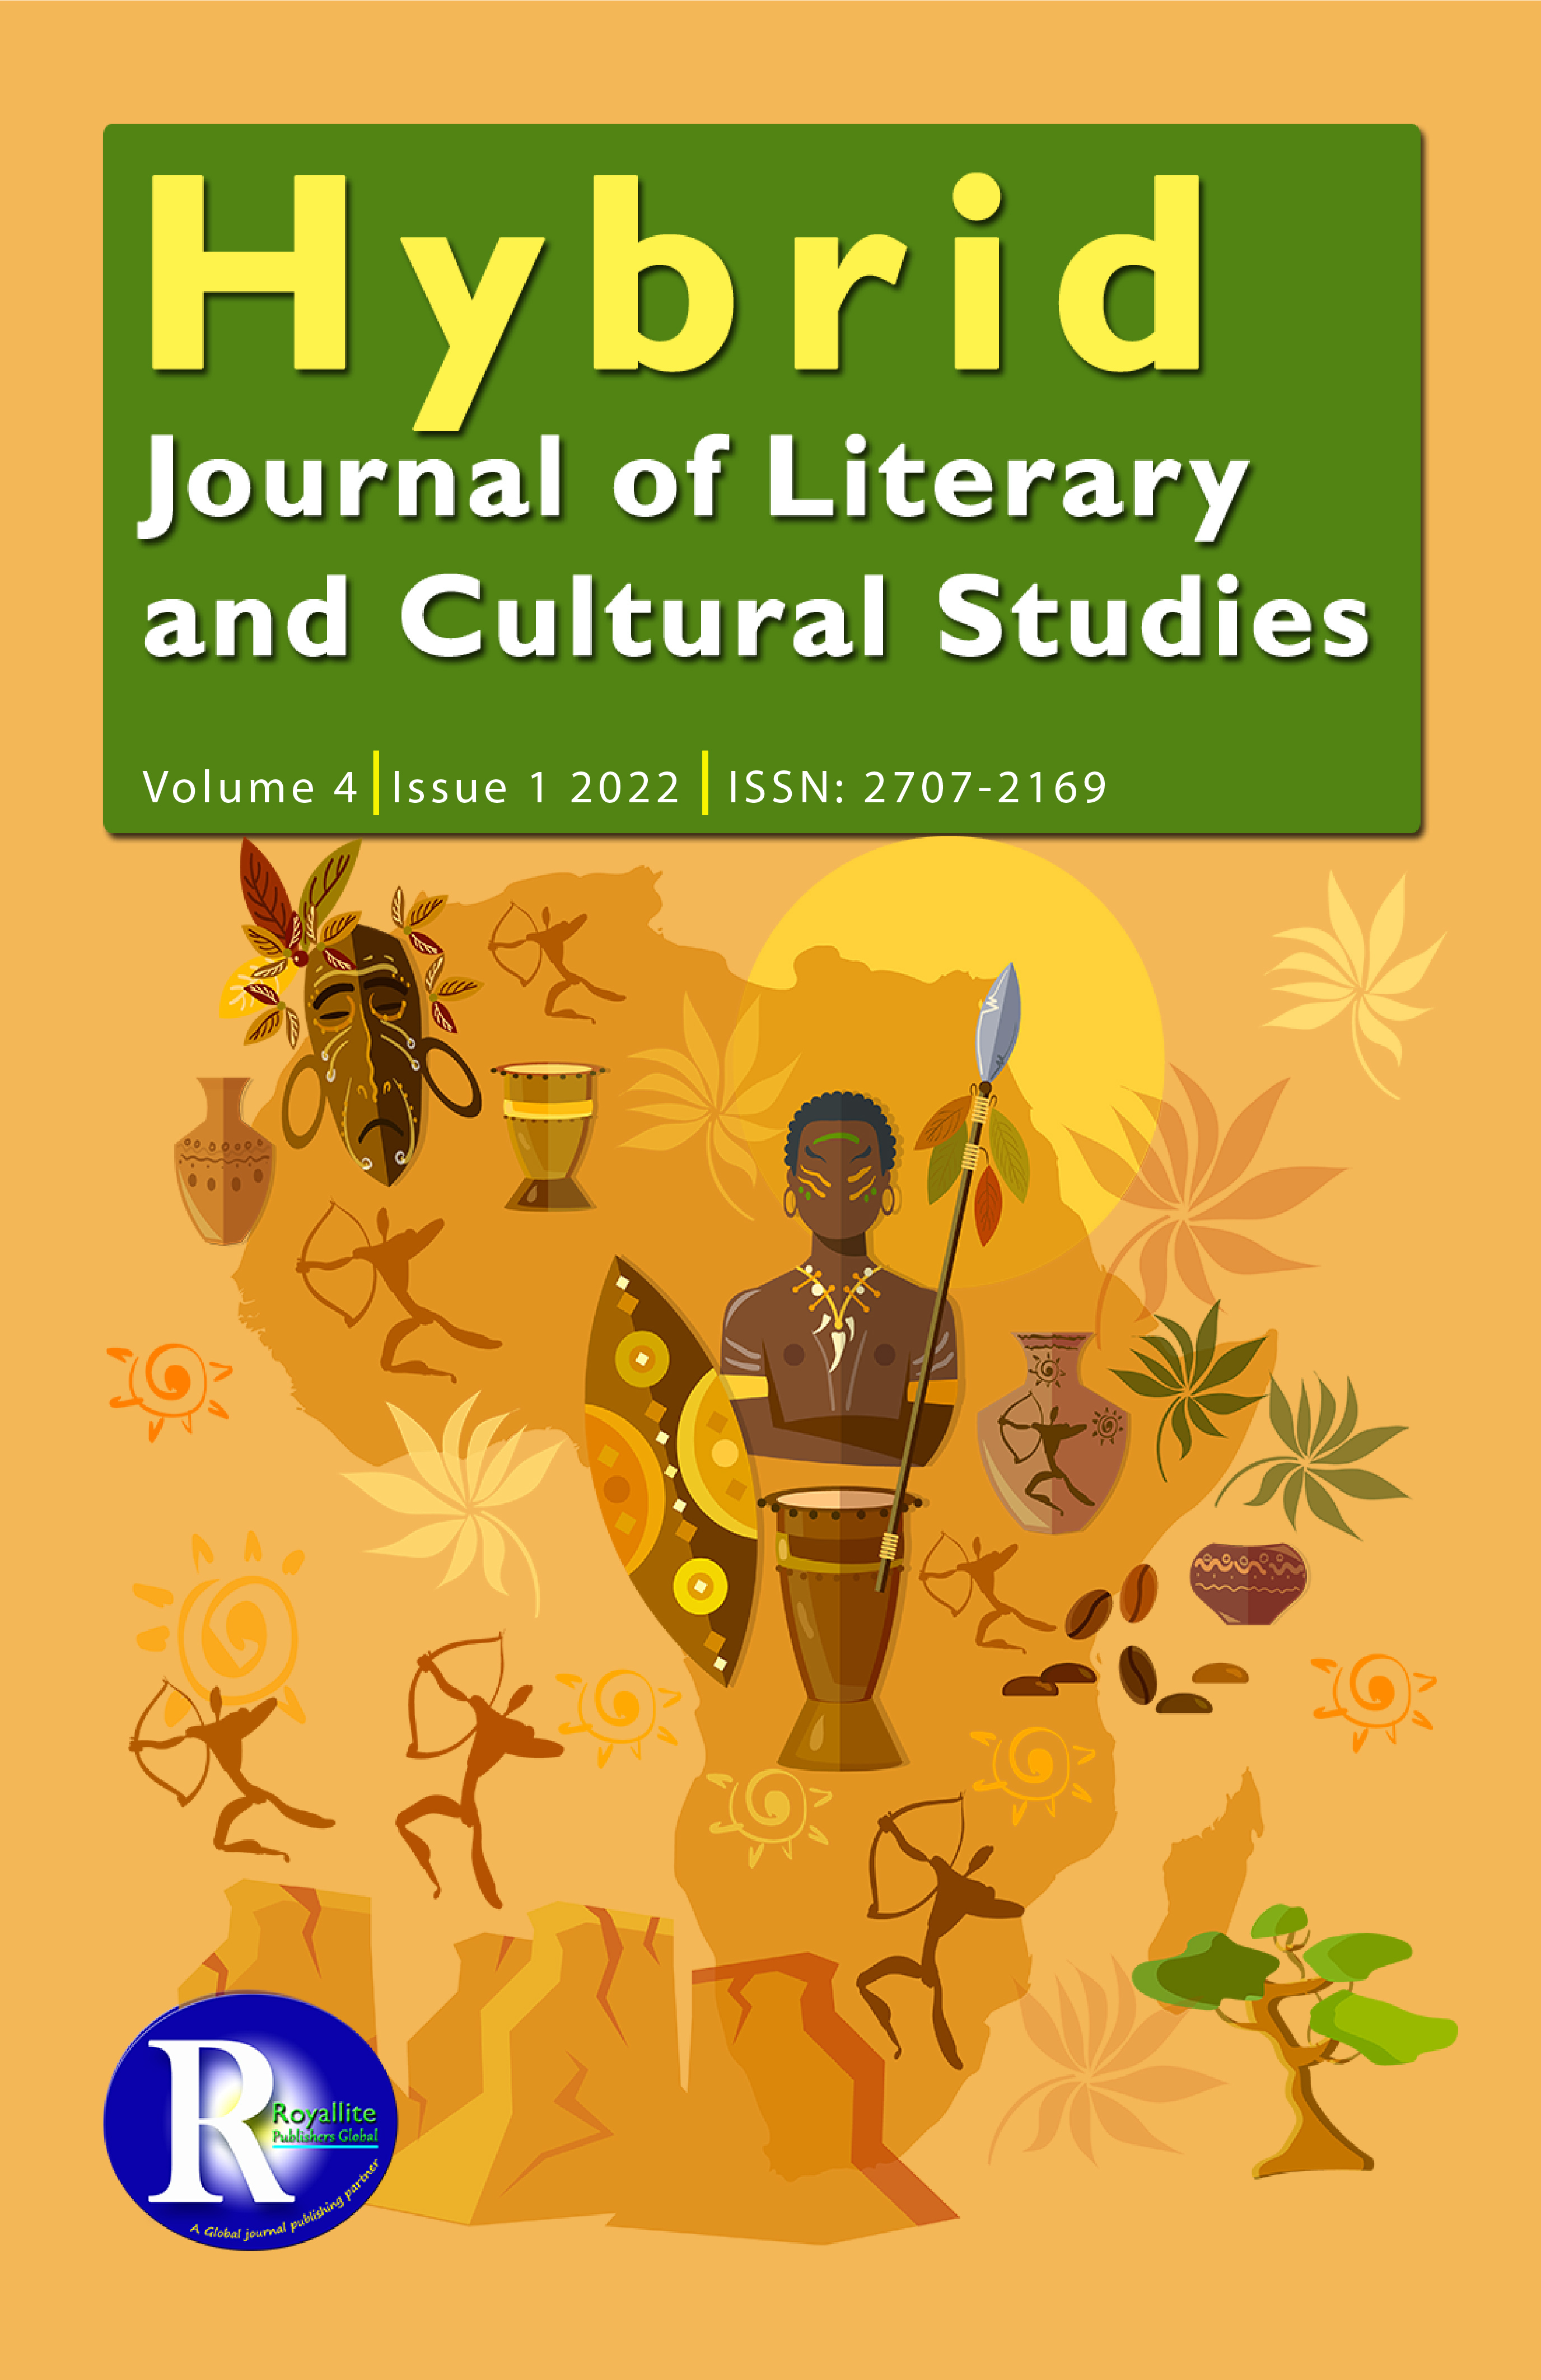 Hybrid Journal of Literary and Cultural Studies